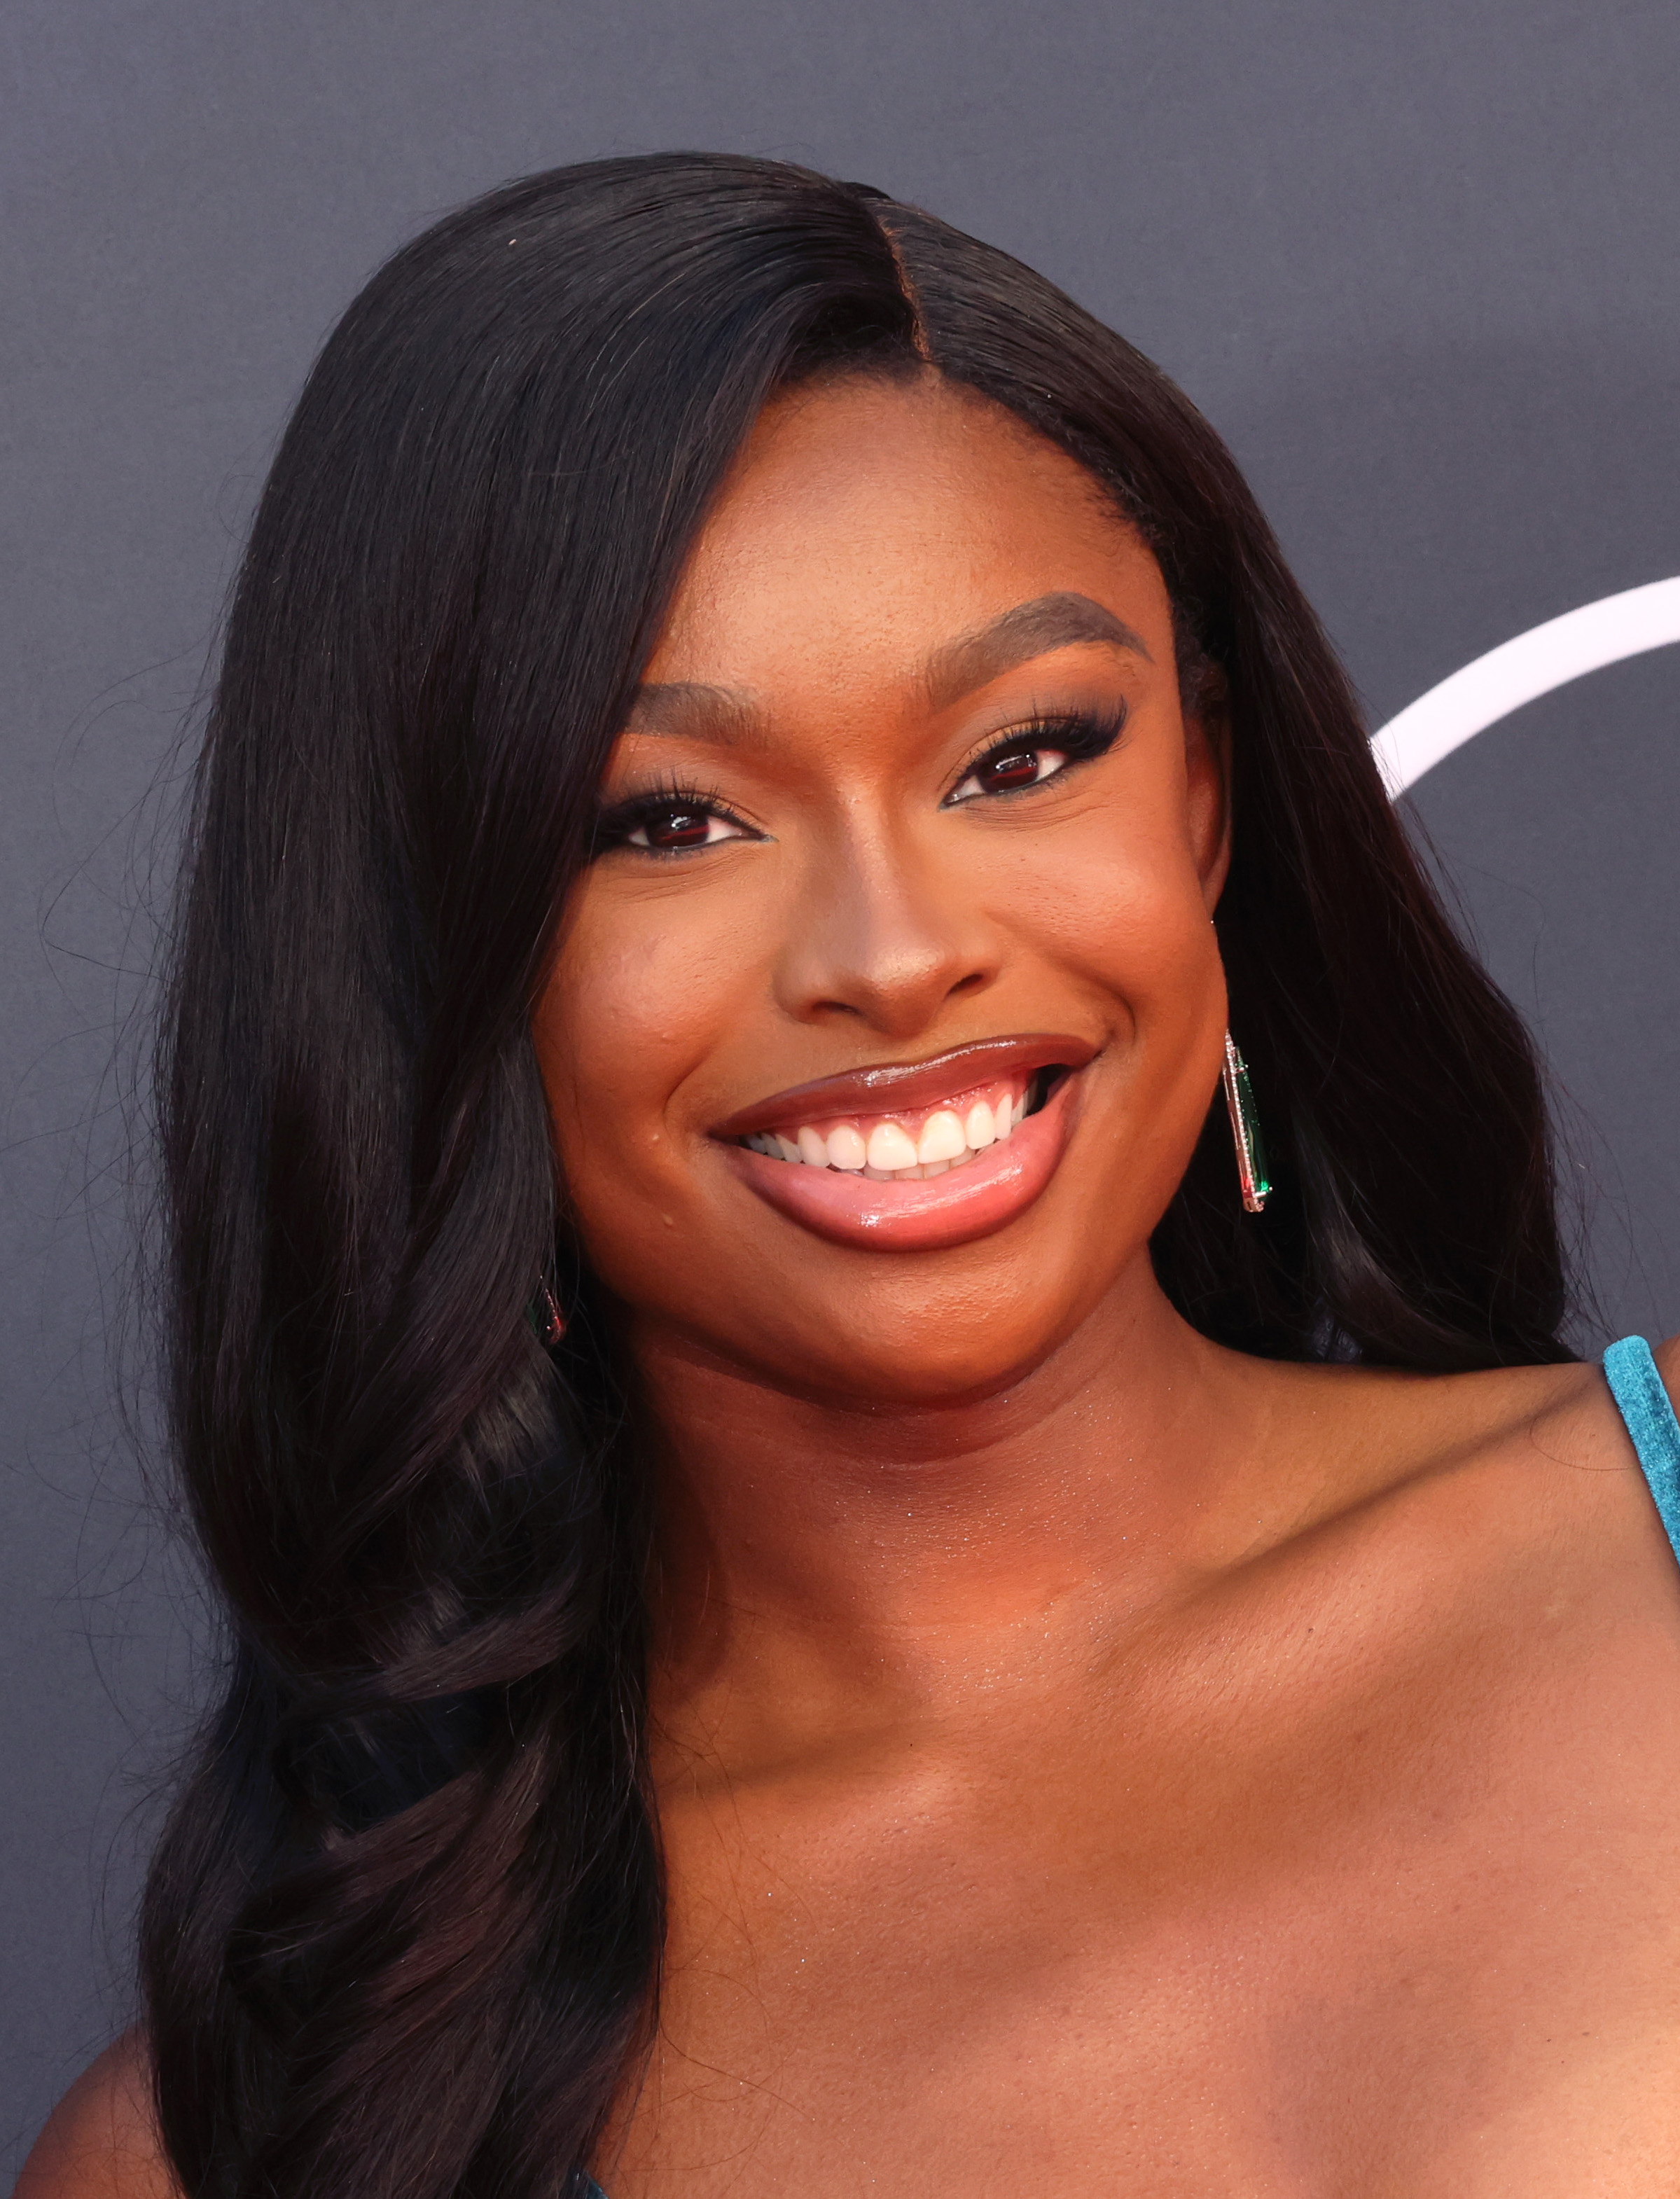 Coco Jones at the 2023 ESPYs Awards on July 12, 2023, in Hollywood, California. | Source: Getty Images